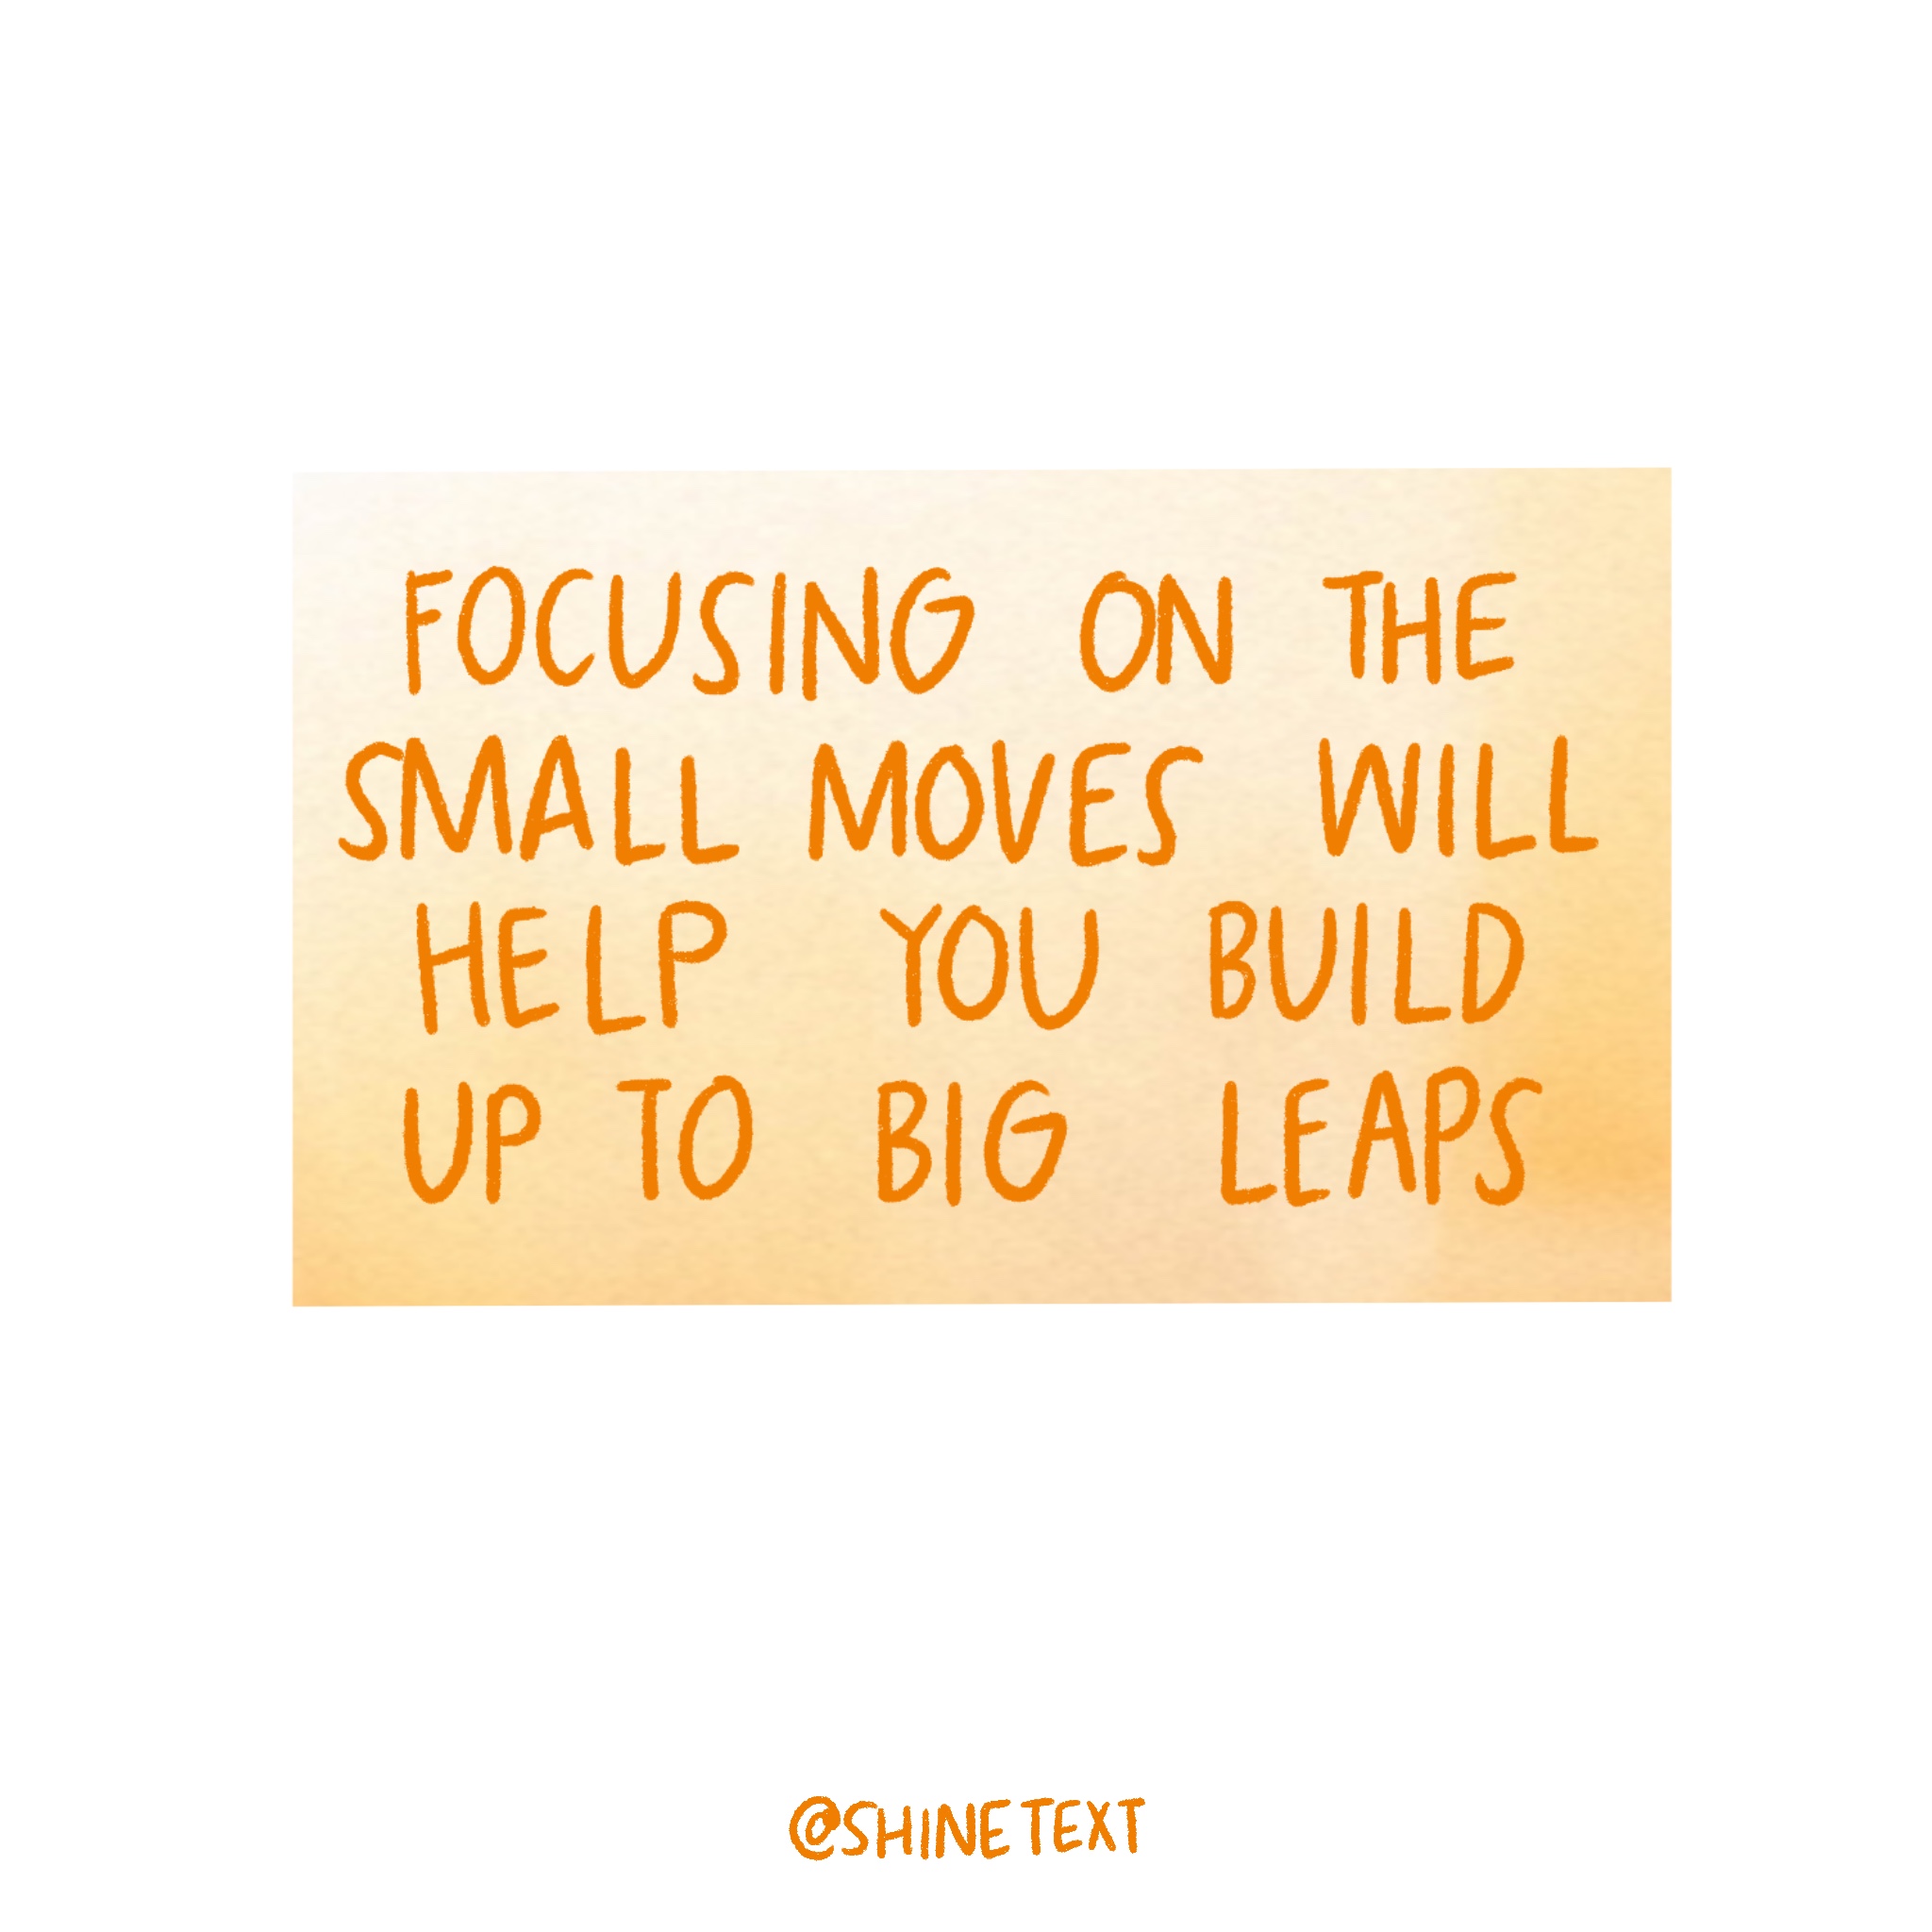 Focusing on small moves will help you build up to big leaps